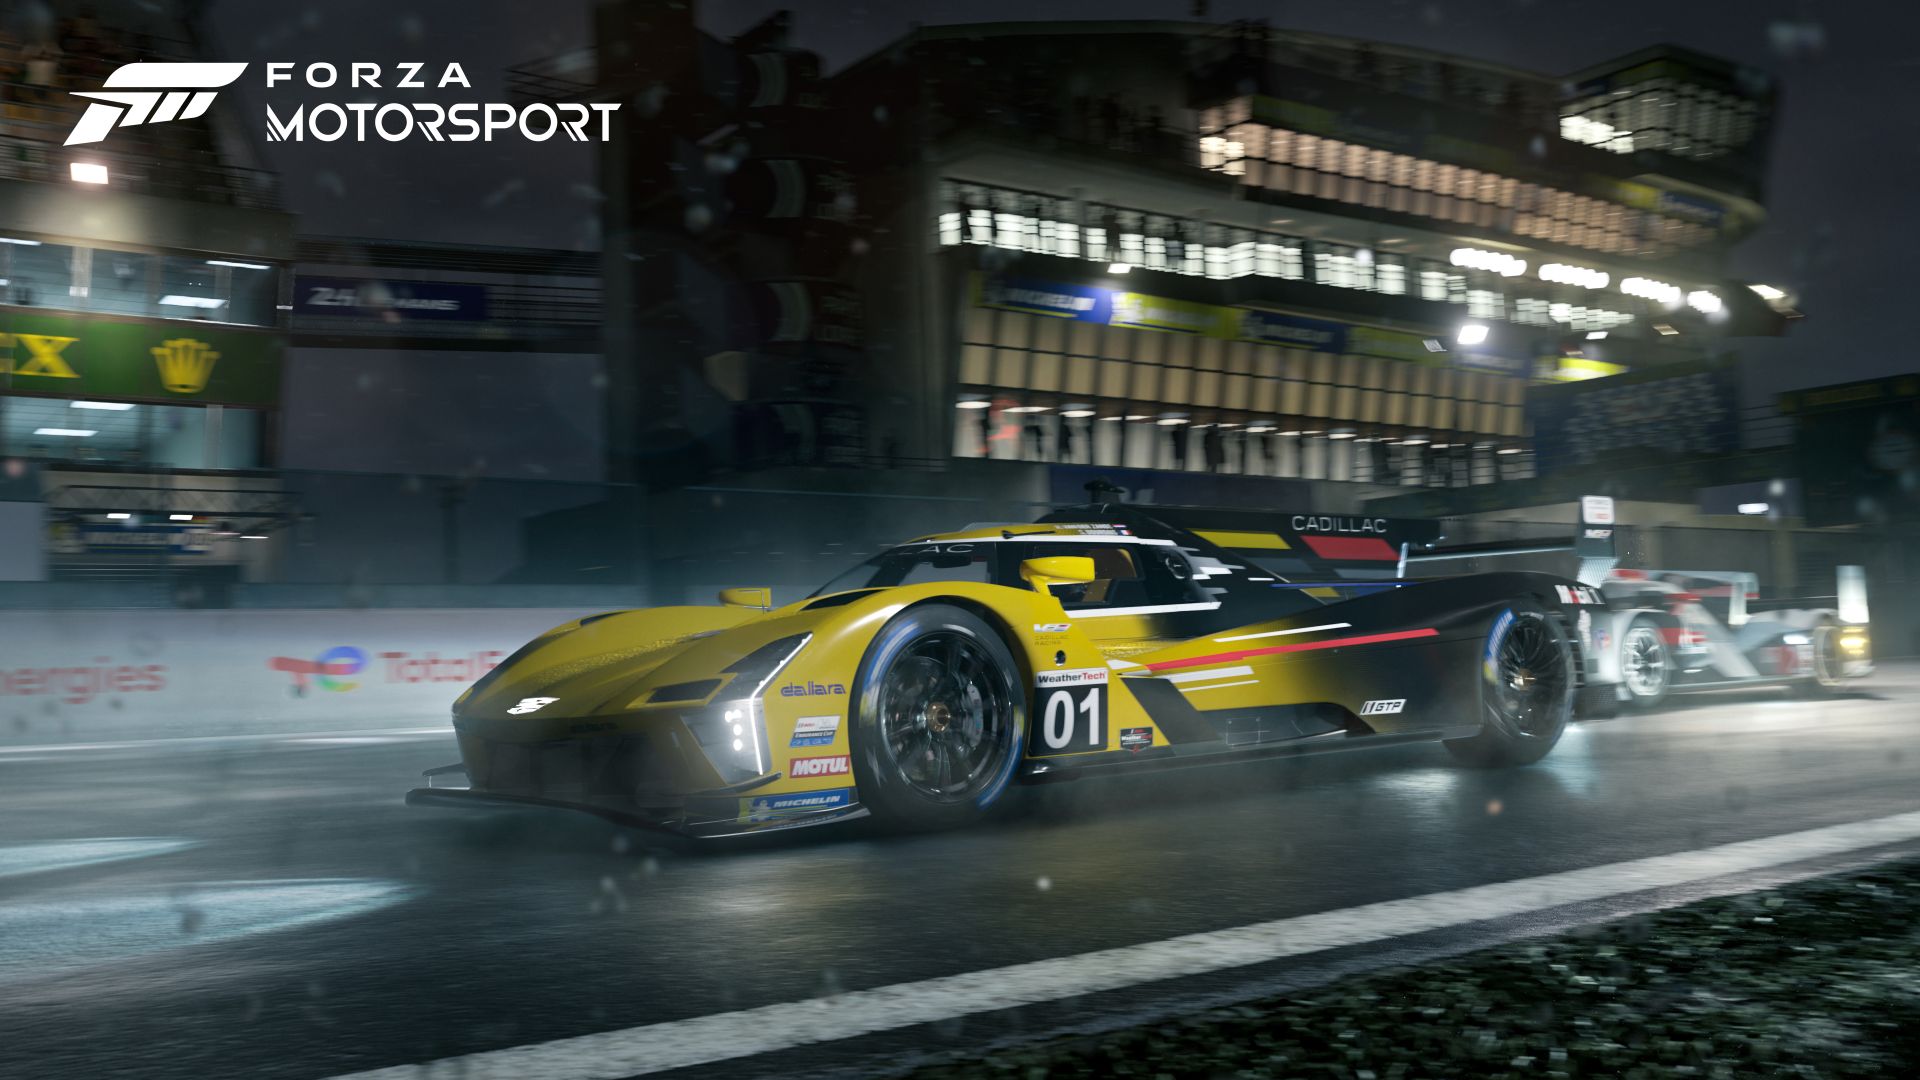 Top 13 FREE Racing Games for PC / Best Free Racing Games / Free